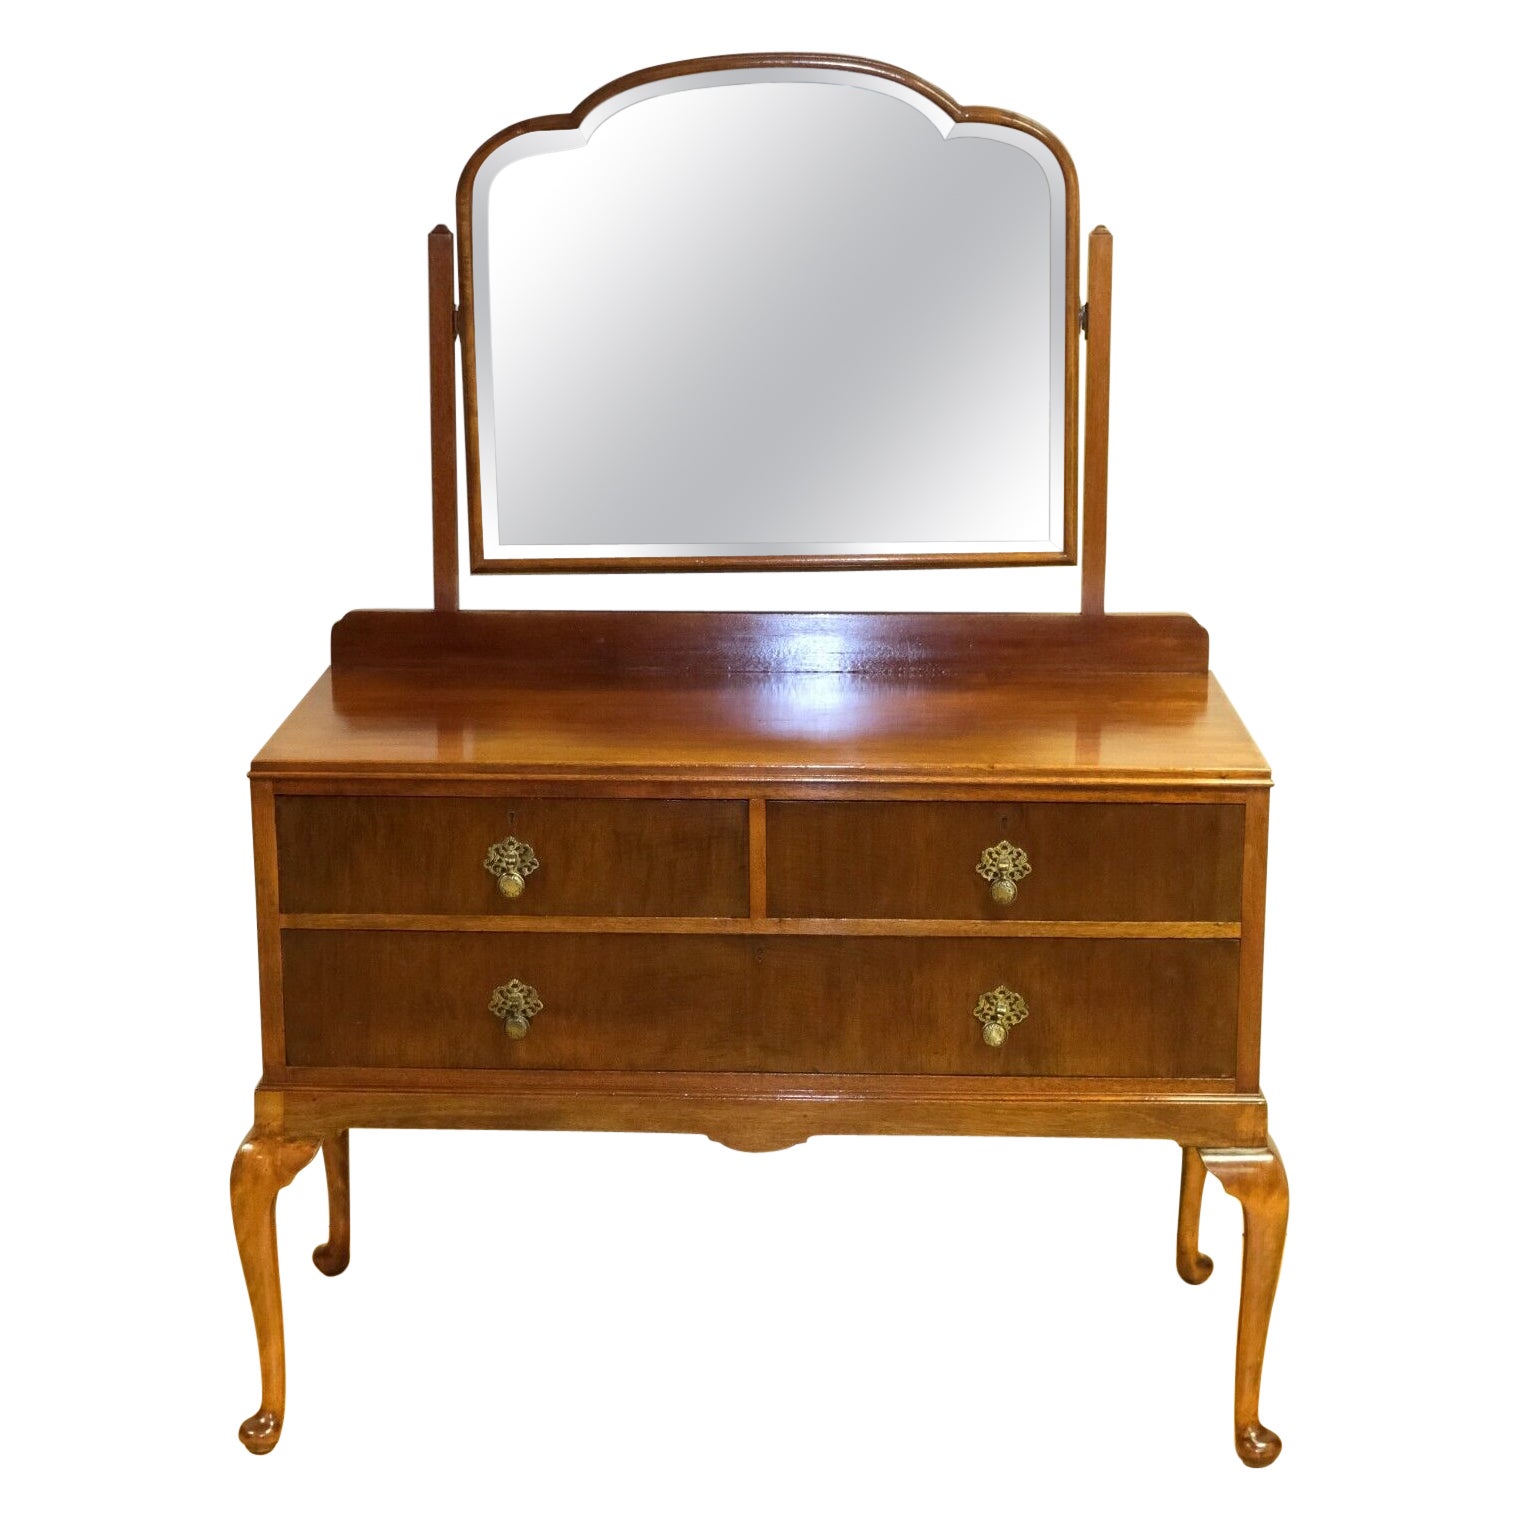 LOVELY EARLY 20TH Century DRESSiNG TABLE HARDWOOD RAISED ON CABRIOLE LEGS